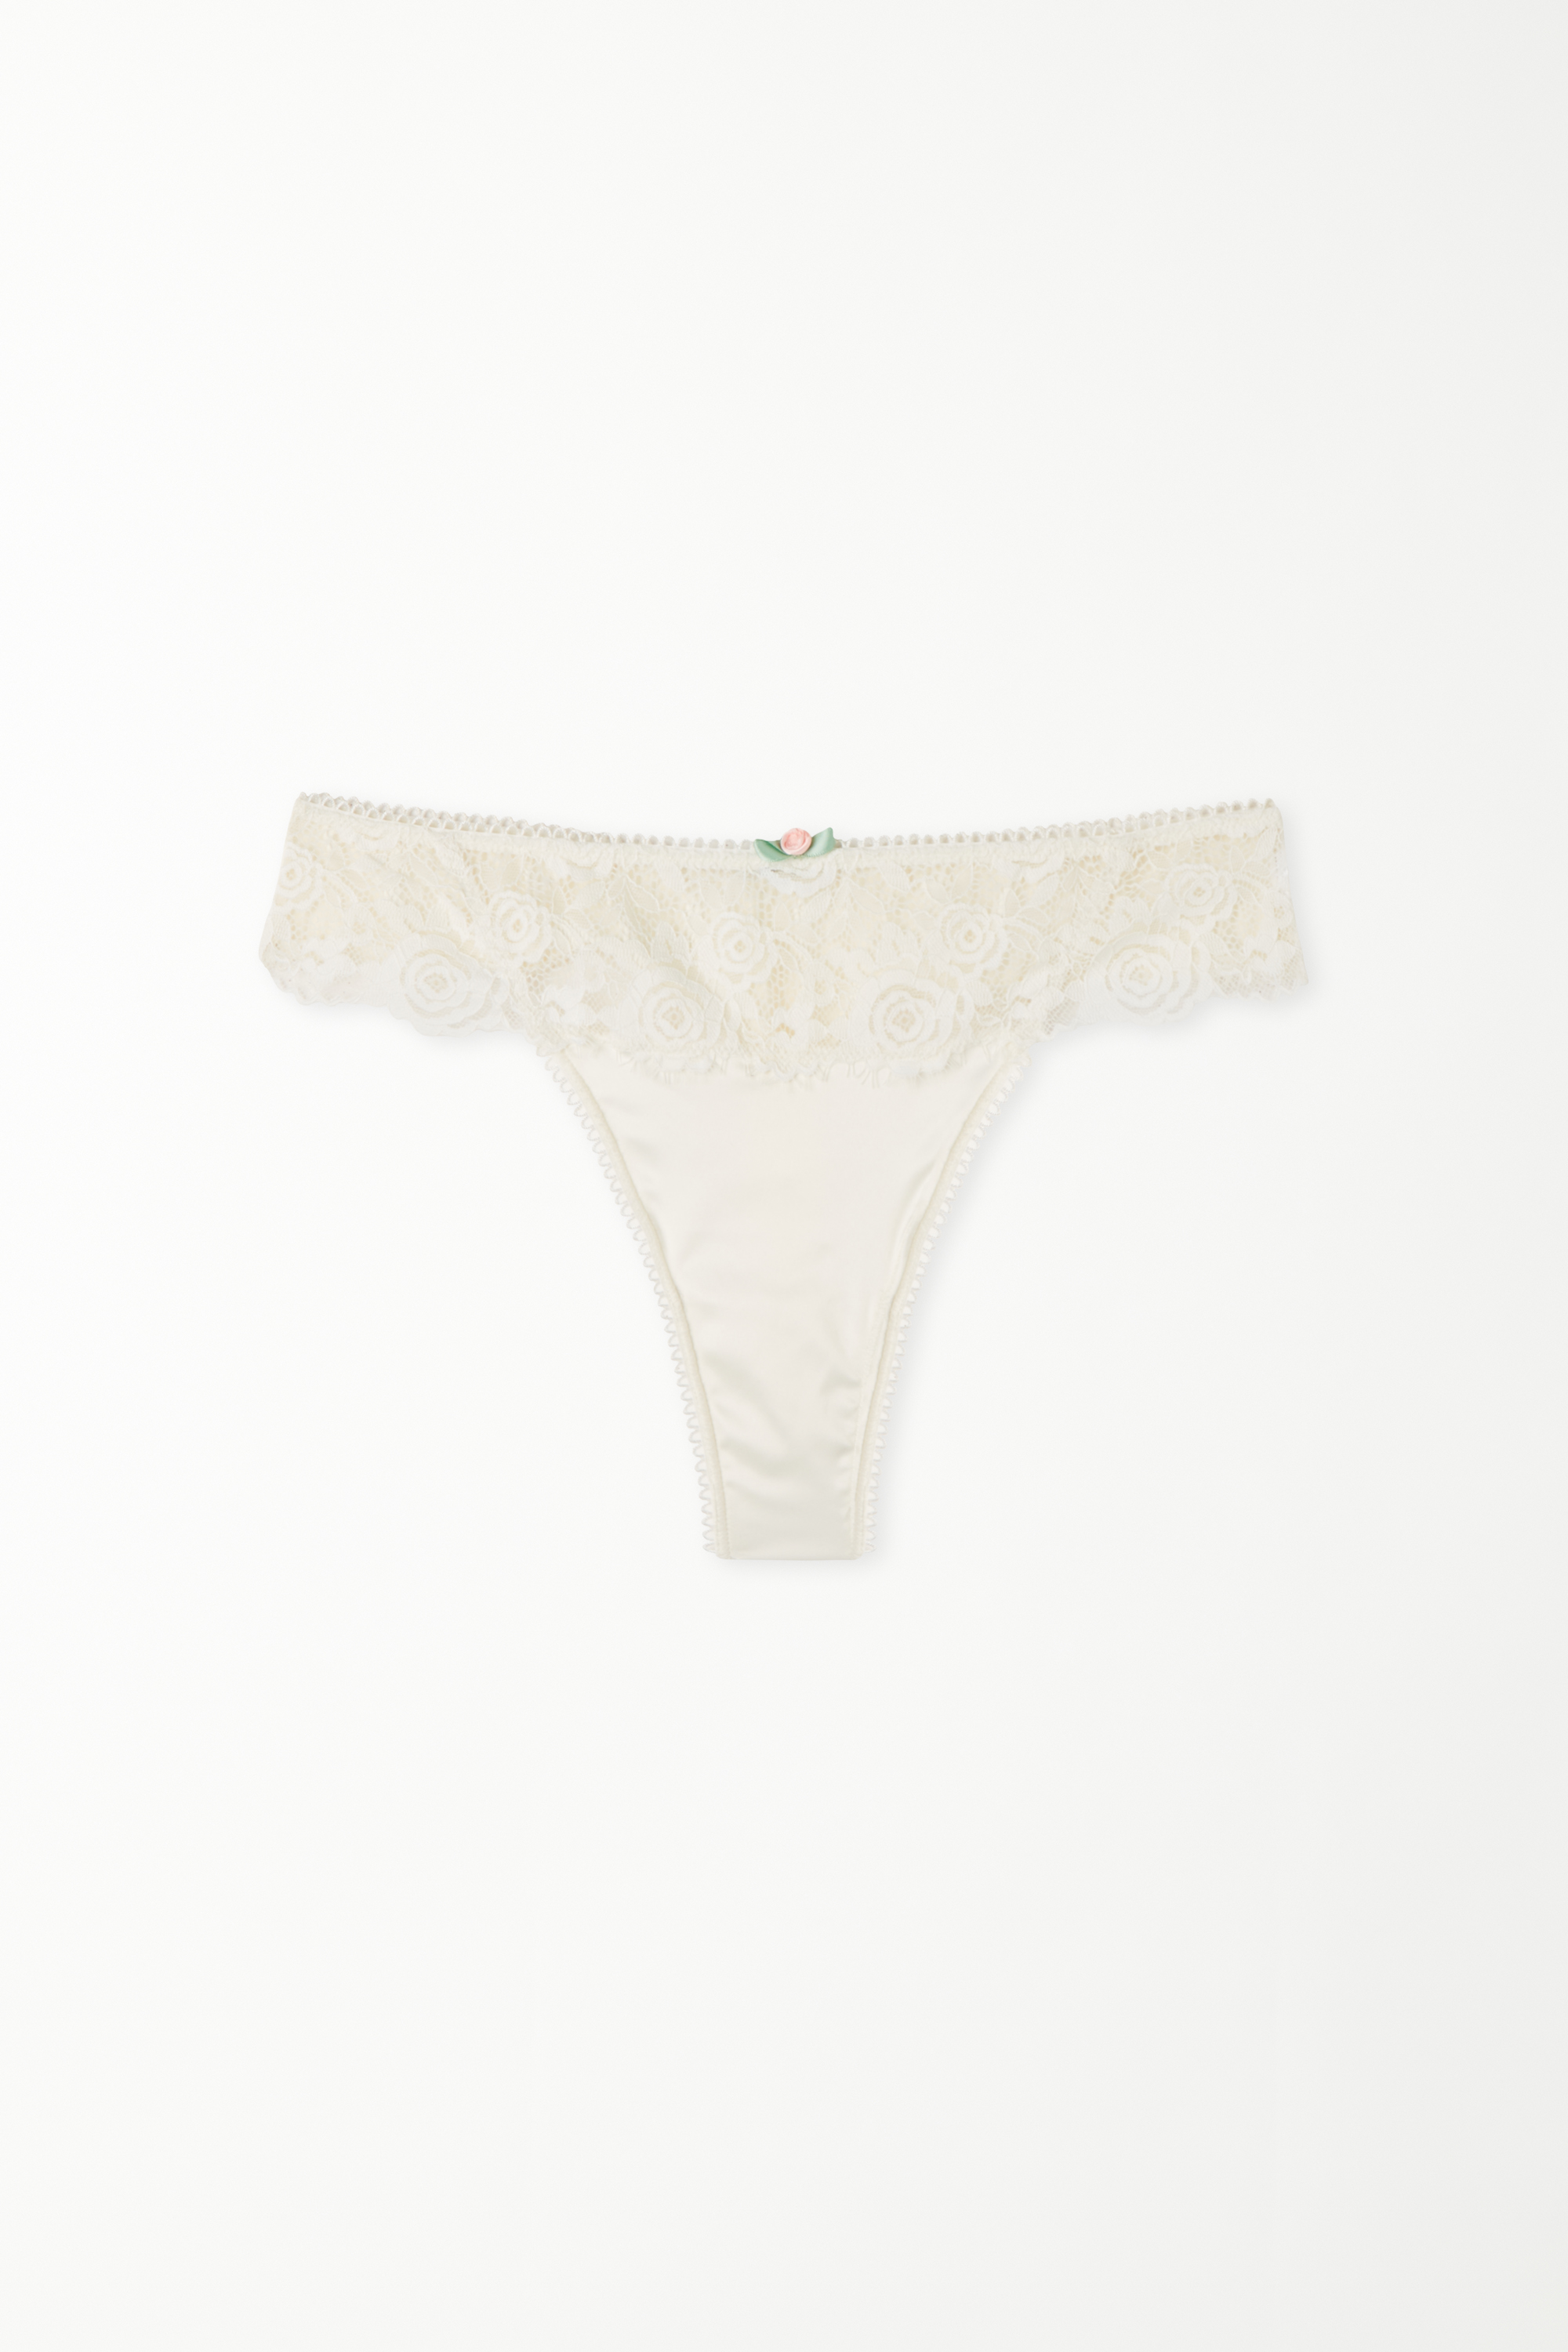 Milk Roses Lace High-Cut G-String